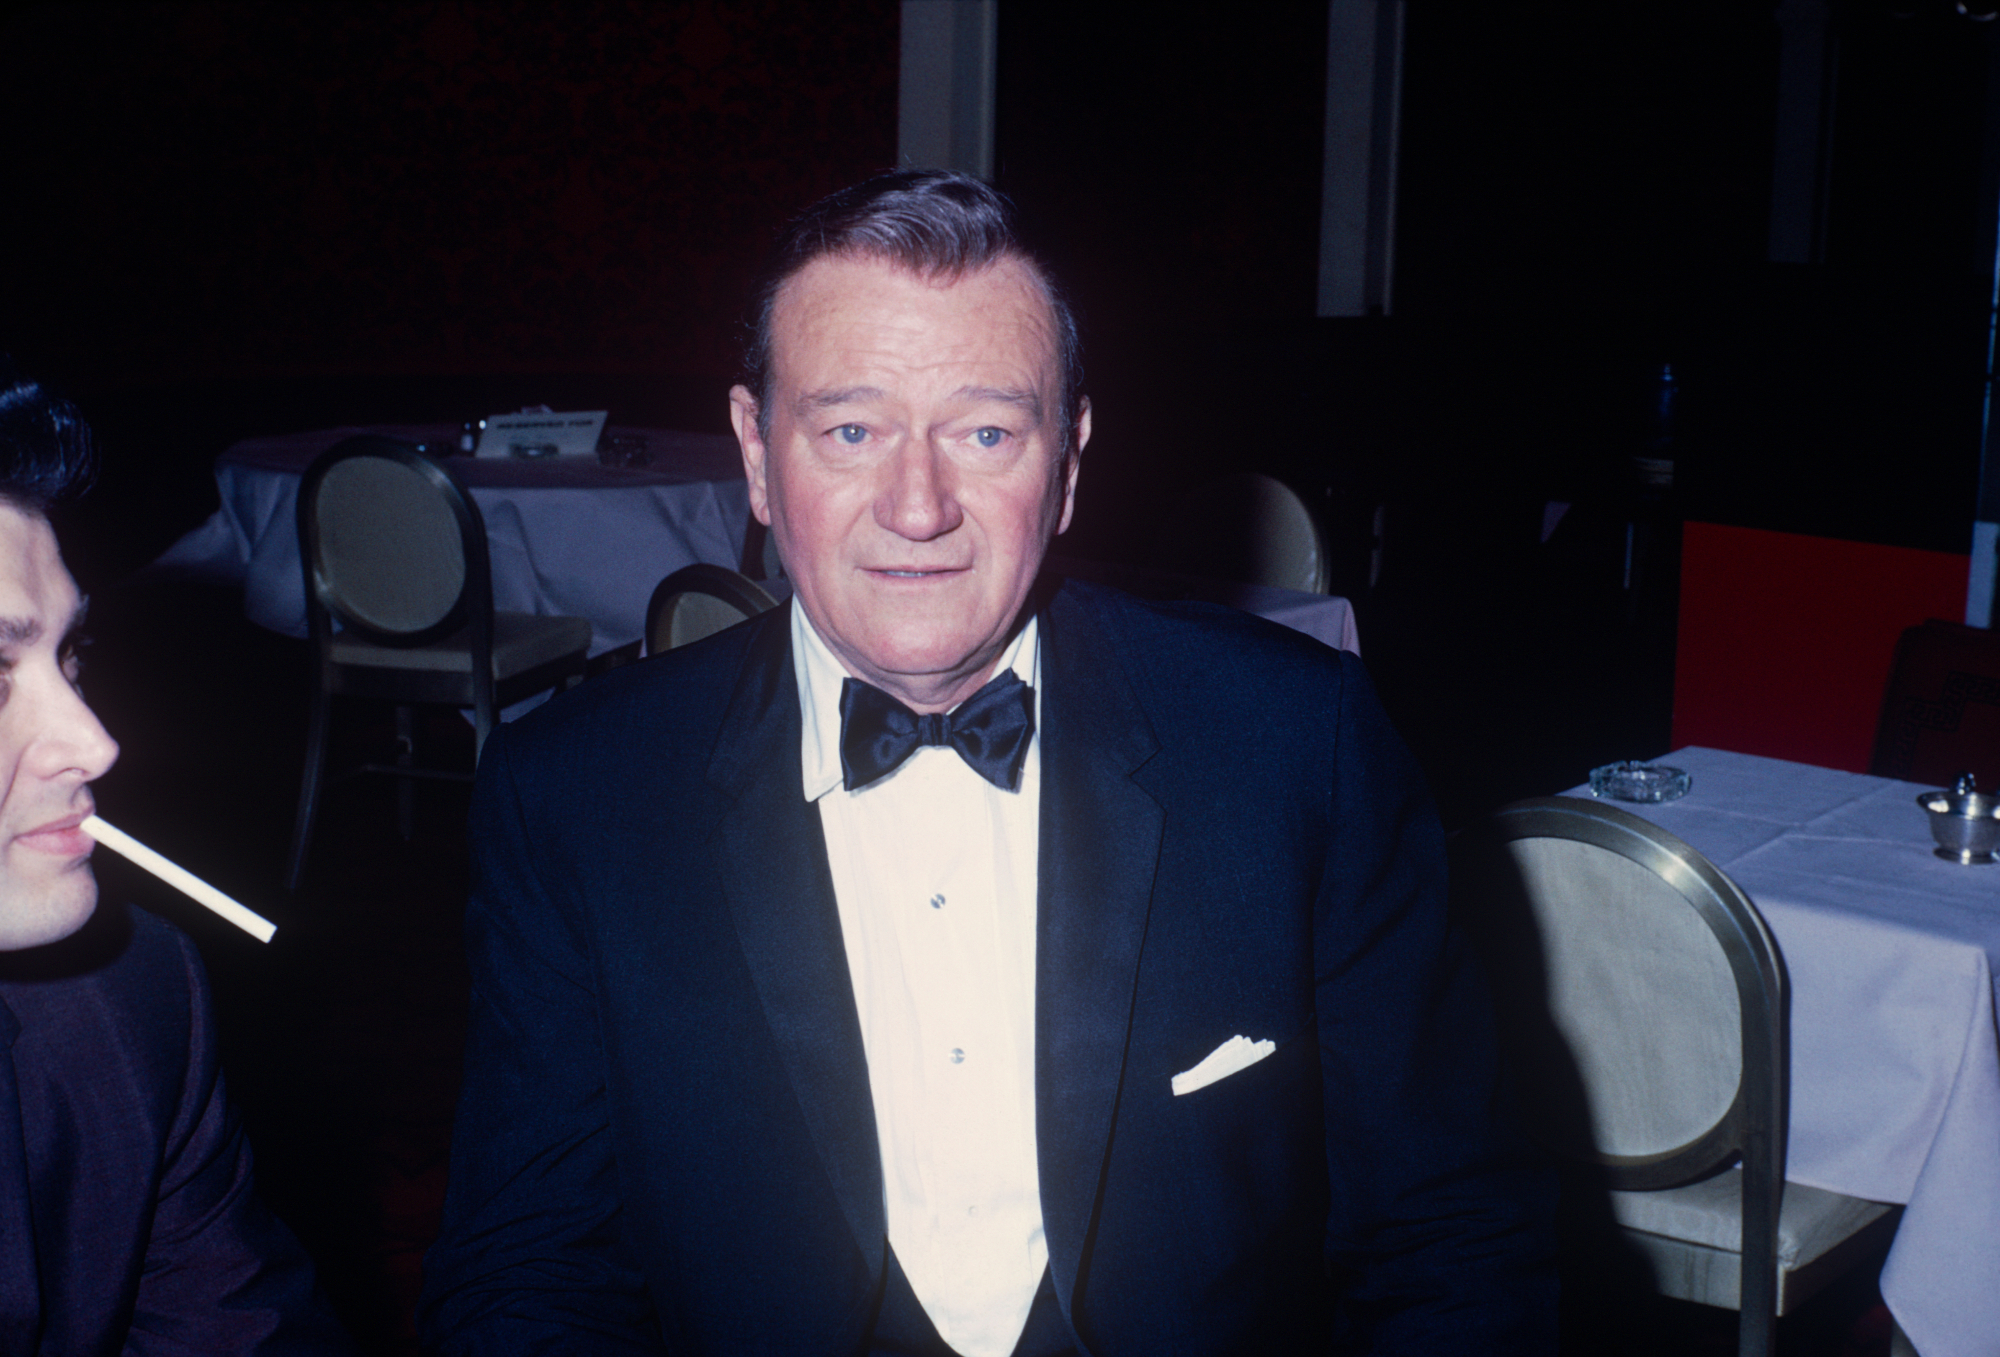 John Wayne, who had negative views on the celebration of gay rights, wearing a black-and-white tuxedo with white table-clothed tables in the background